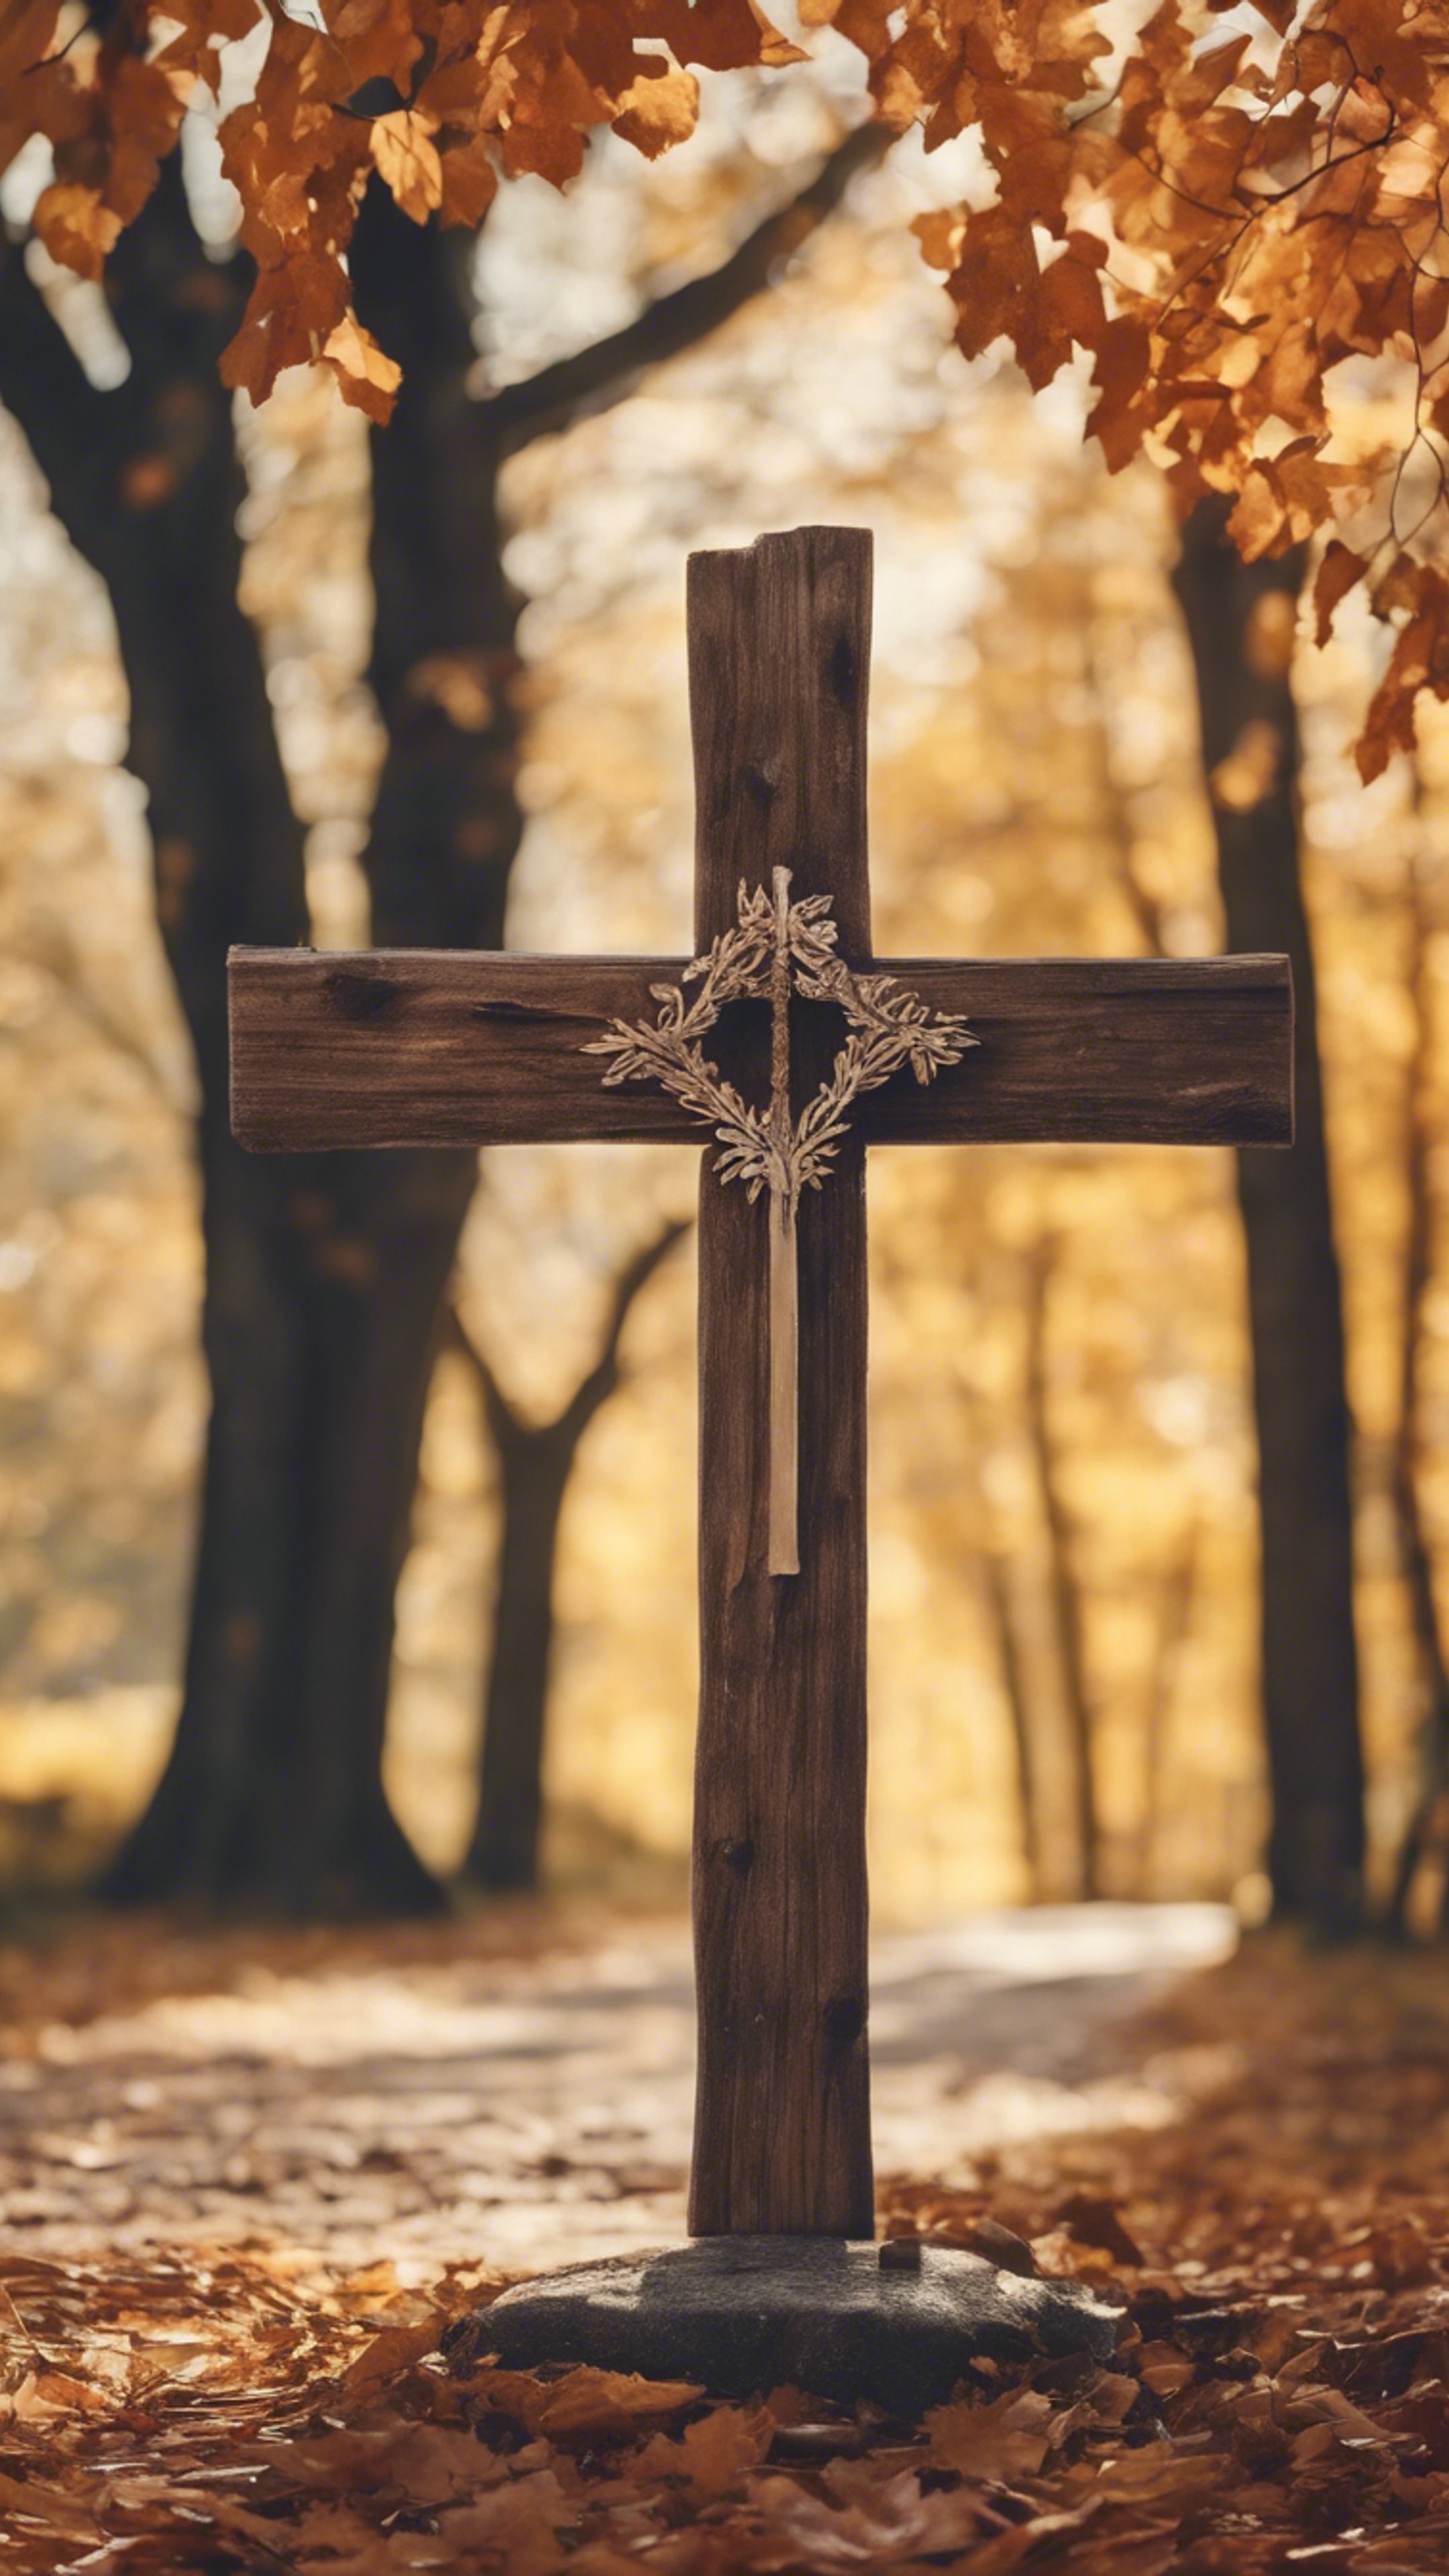 A rustic wooden cross standing by a country road, surrounded by autumn leaves.壁紙[8ef87987617941c481d6]